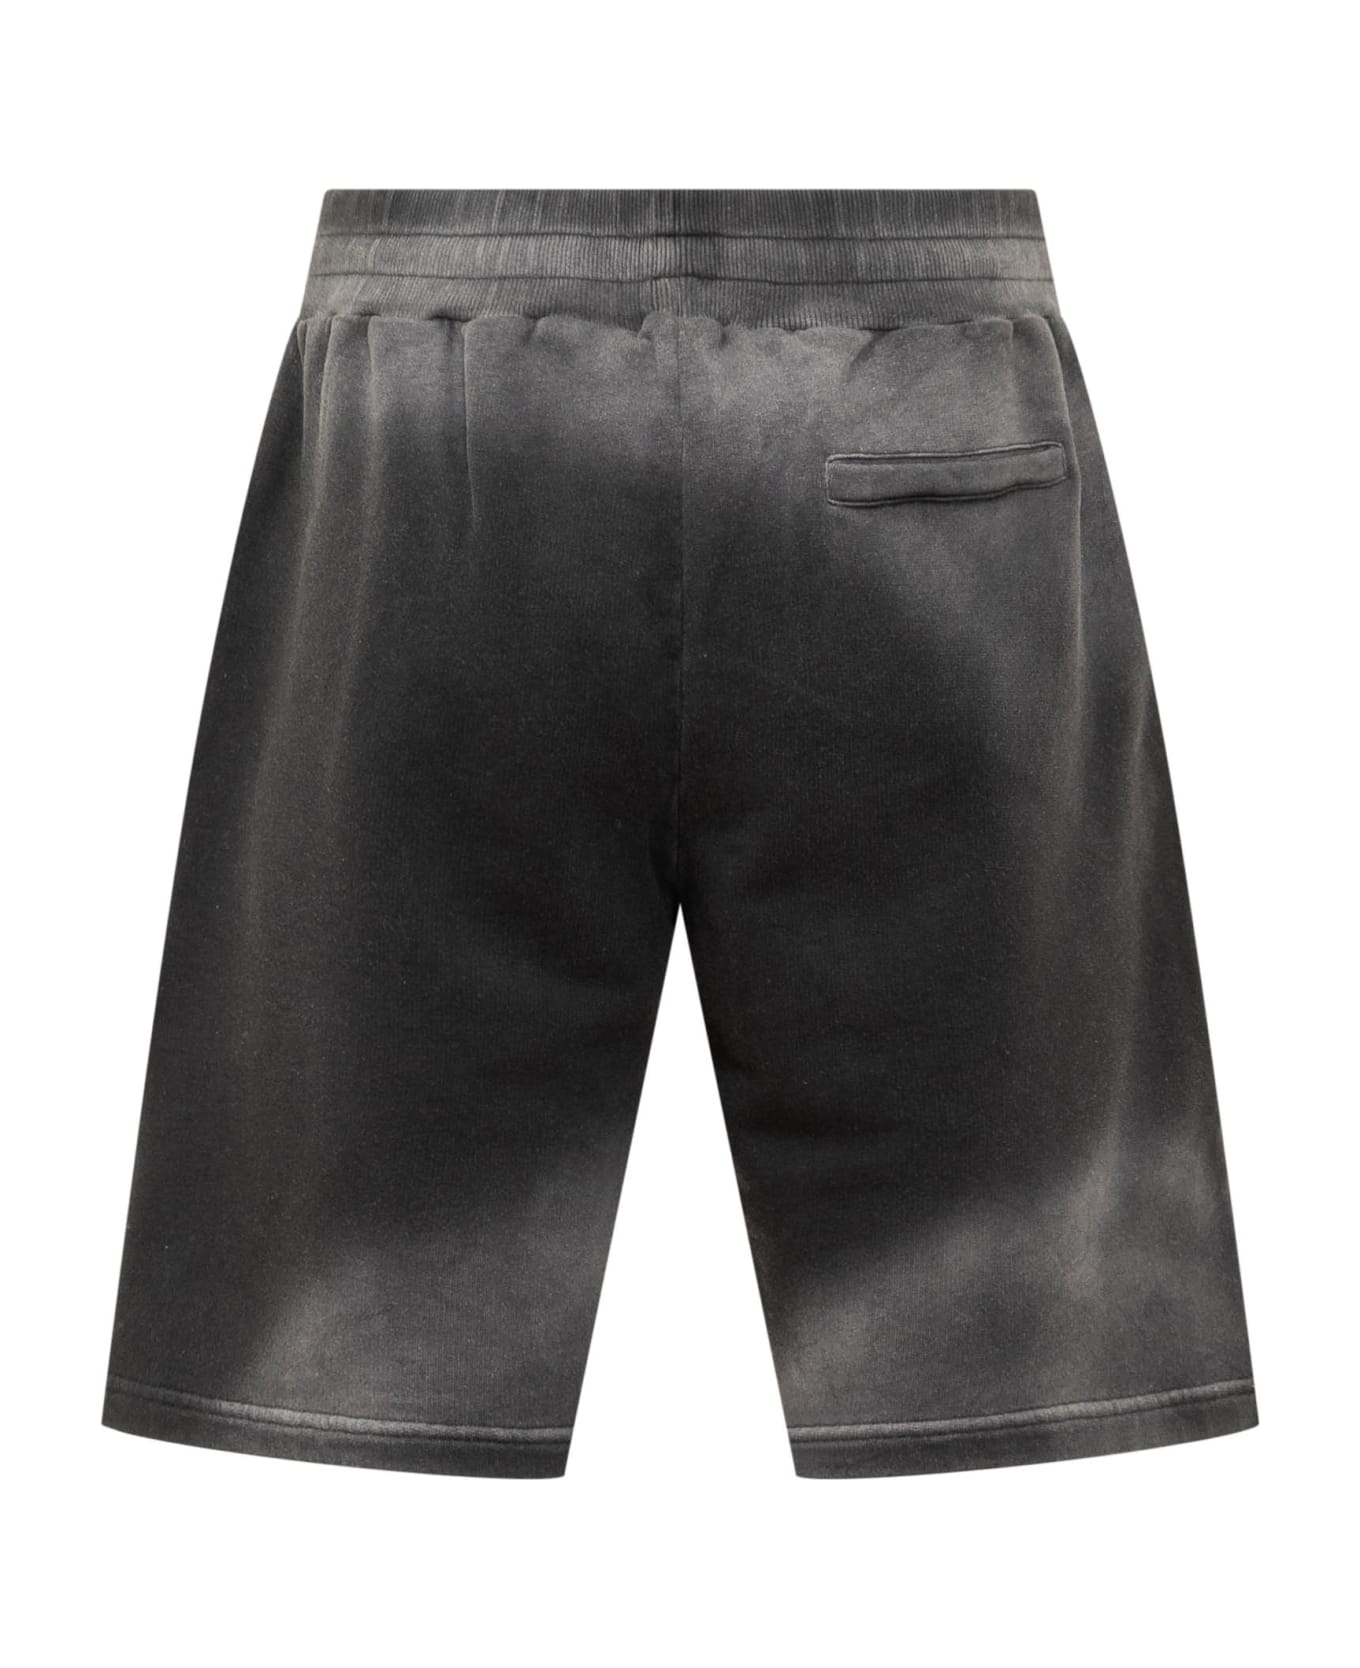 A-COLD-WALL Gradient Jersey Shorts - BLACK